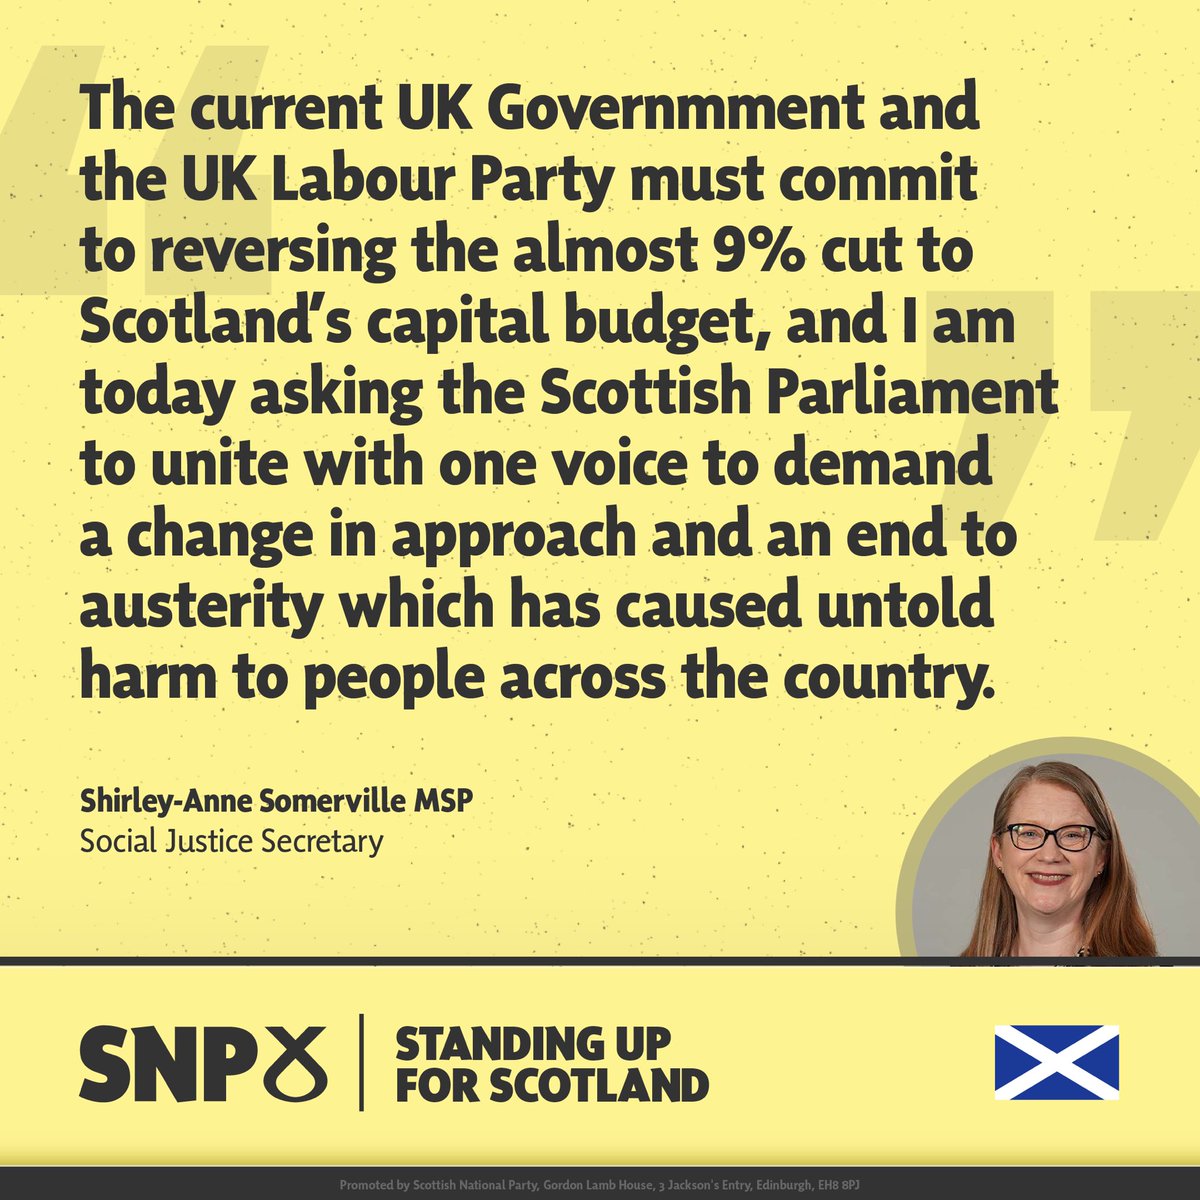 📉 By slashing Scotland’s capital budget, Westminster is making the challenges we face more difficult. 🏴󠁧󠁢󠁳󠁣󠁴󠁿 The Westminster parties should put an end to fourteen years of crippling austerity.